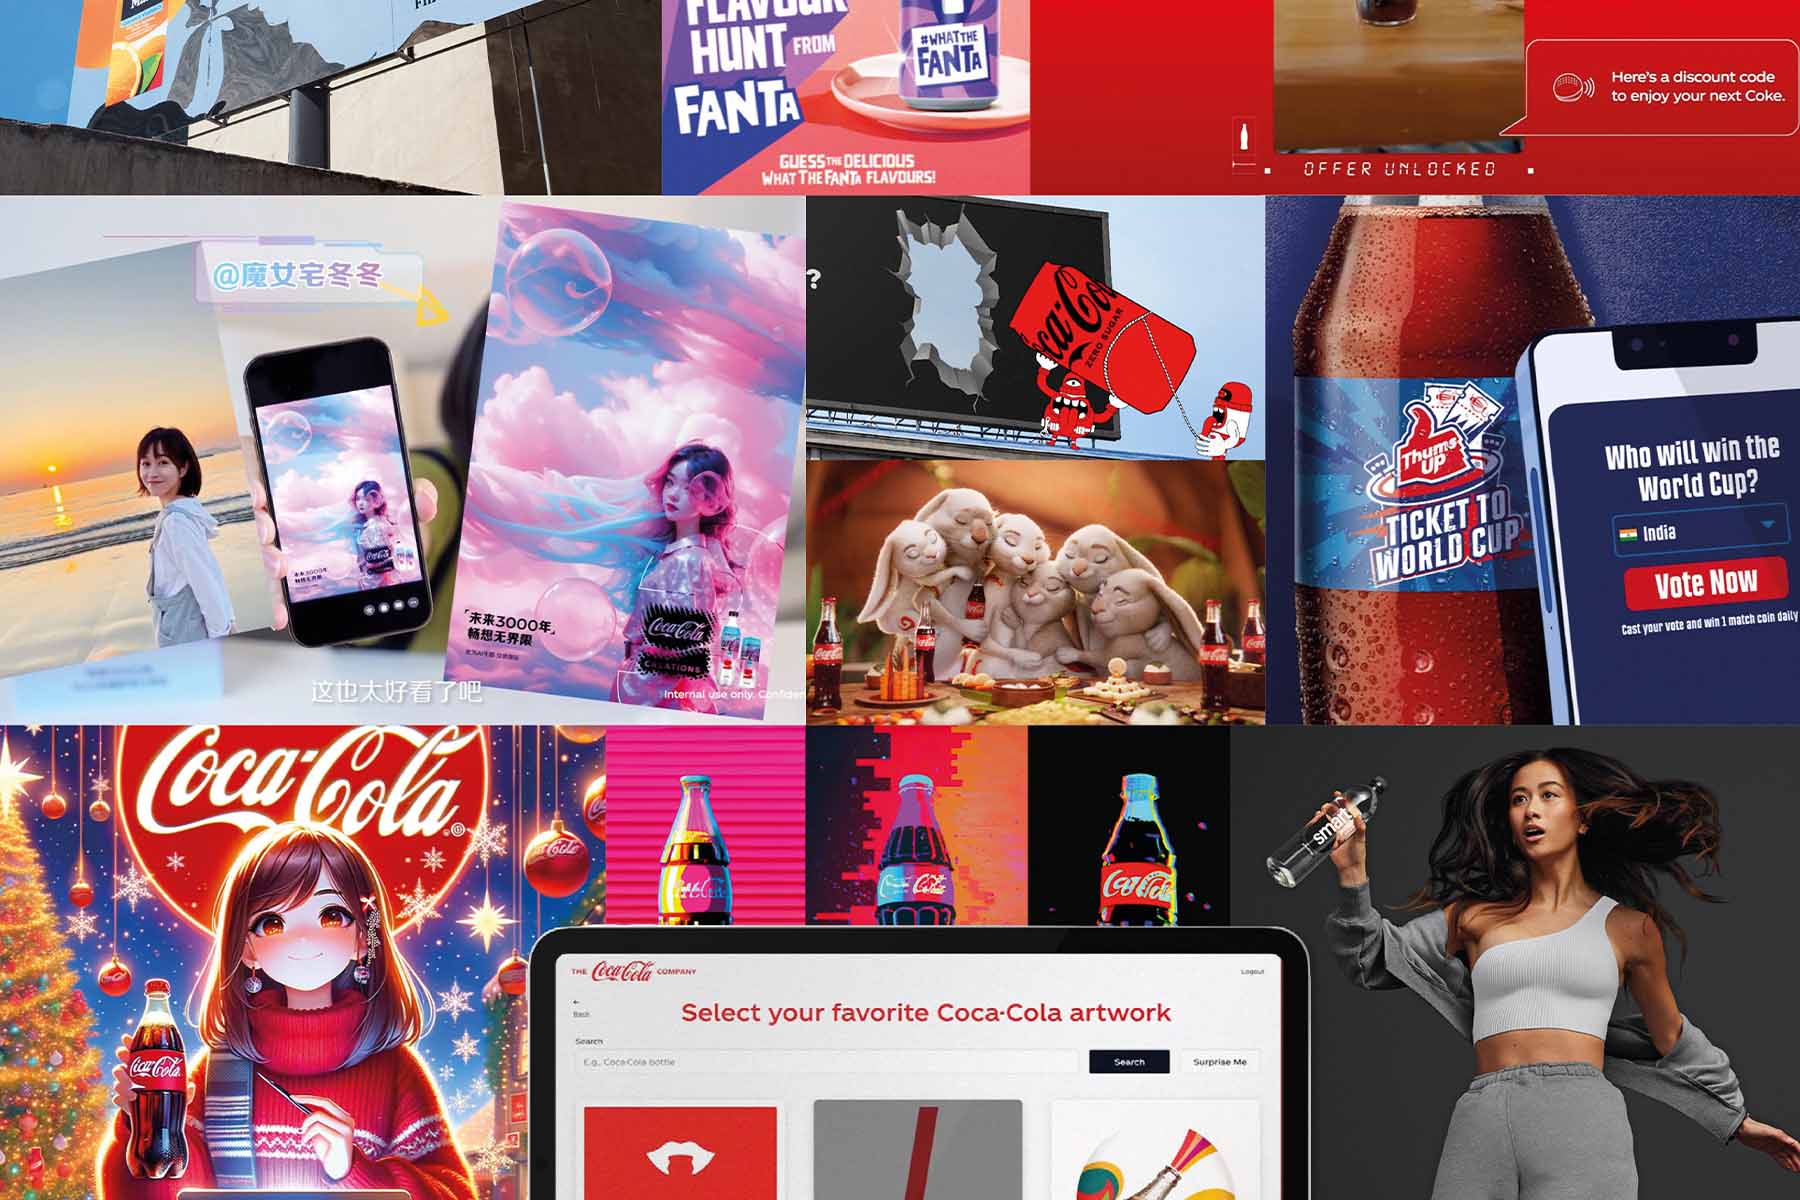 Selection of work for Coca-Cola